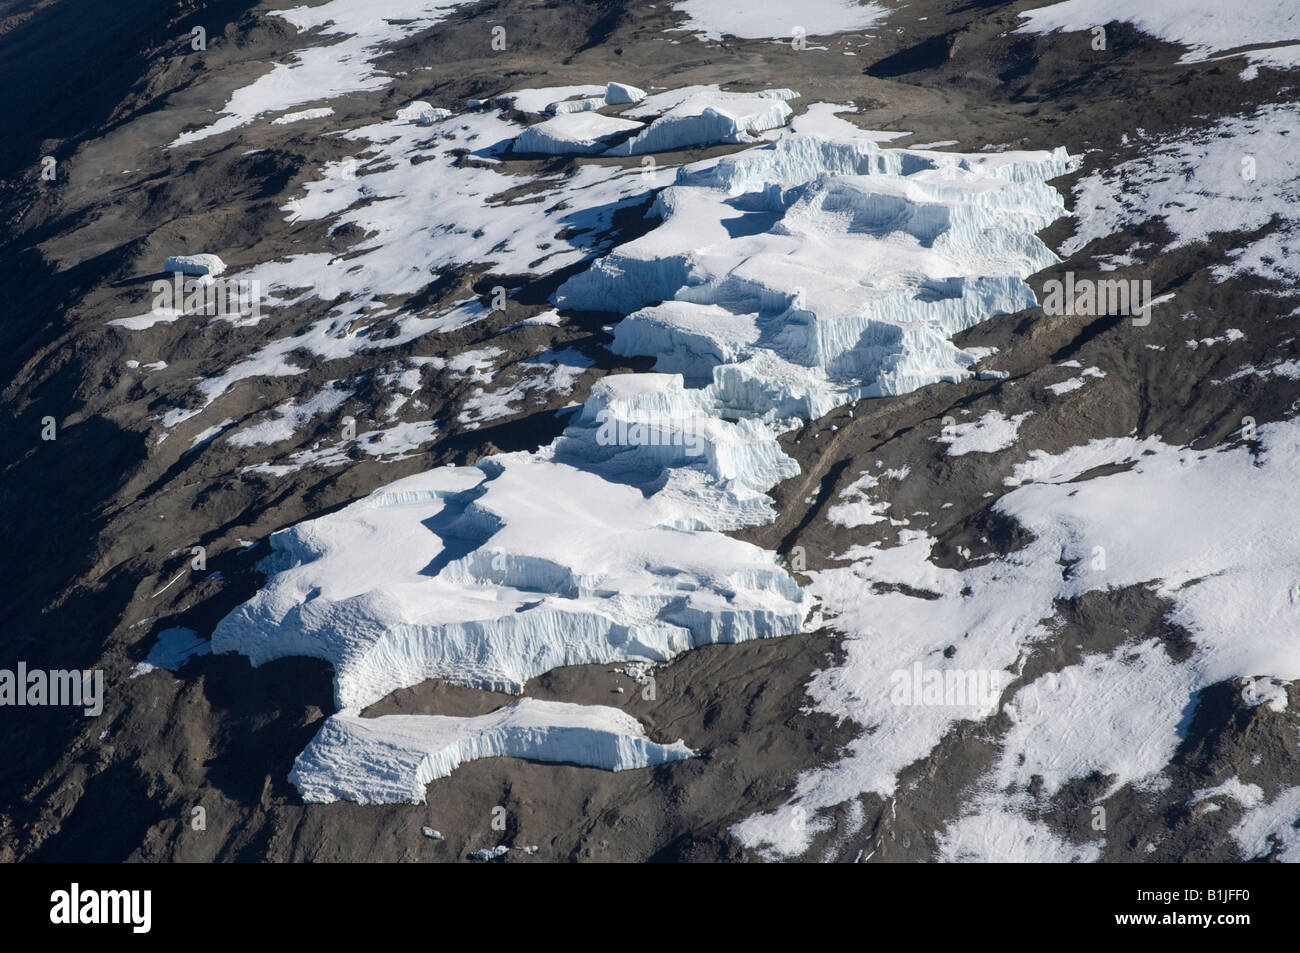 Aerial view of Kilimanjaro 19335 ft  / 5895 m - Spectacular ice cliffs of the Eastern Ice field Stock Photo